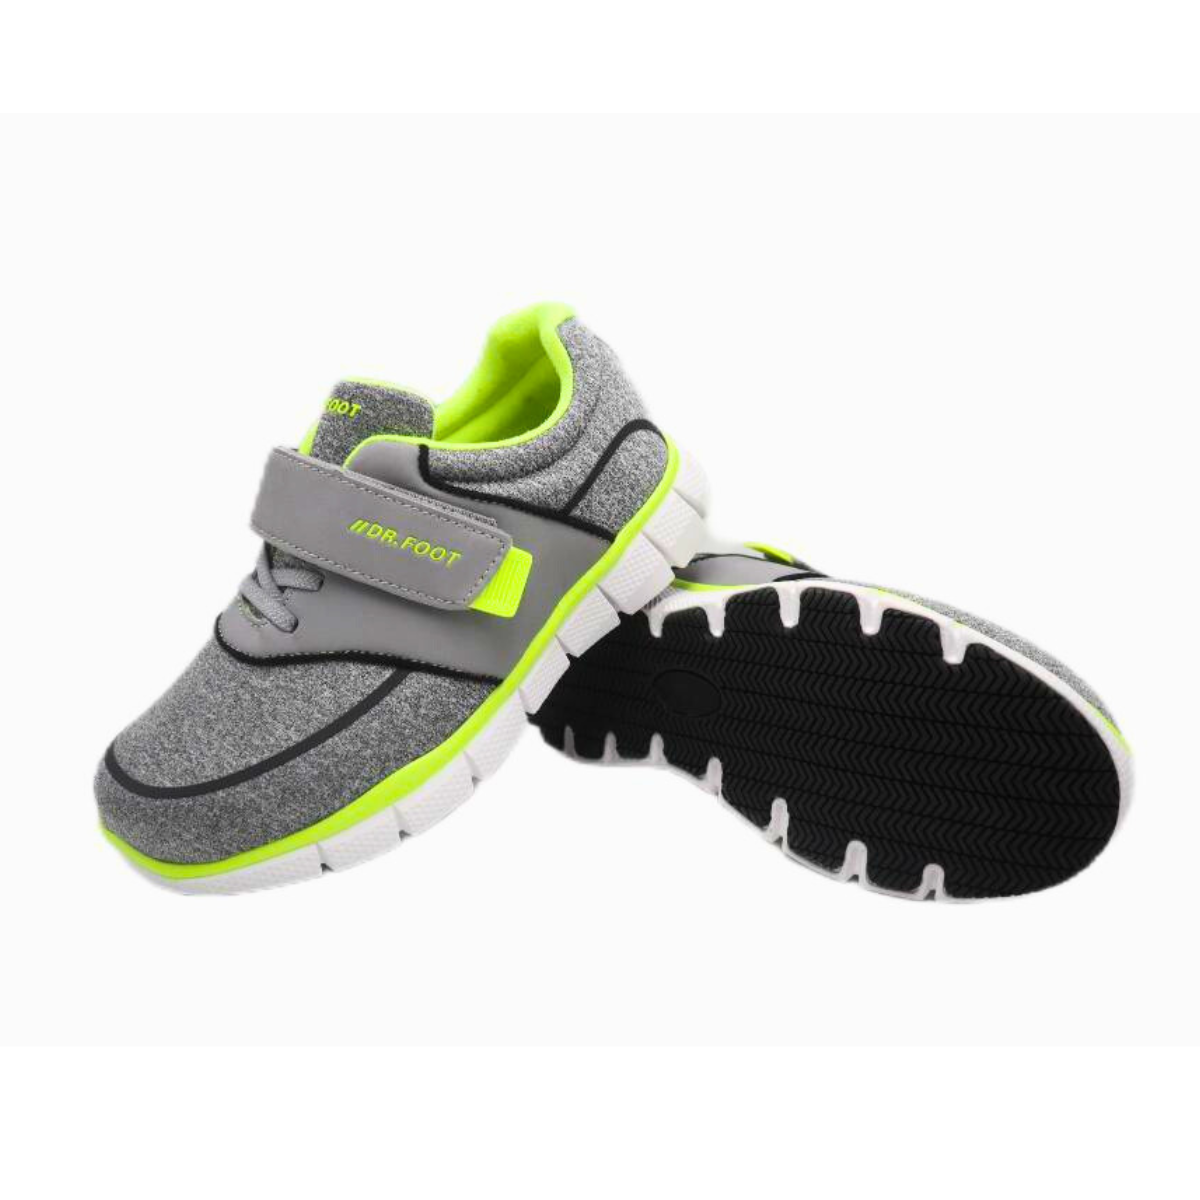 Dr Foot CASUALLITE LT GREY-LIME